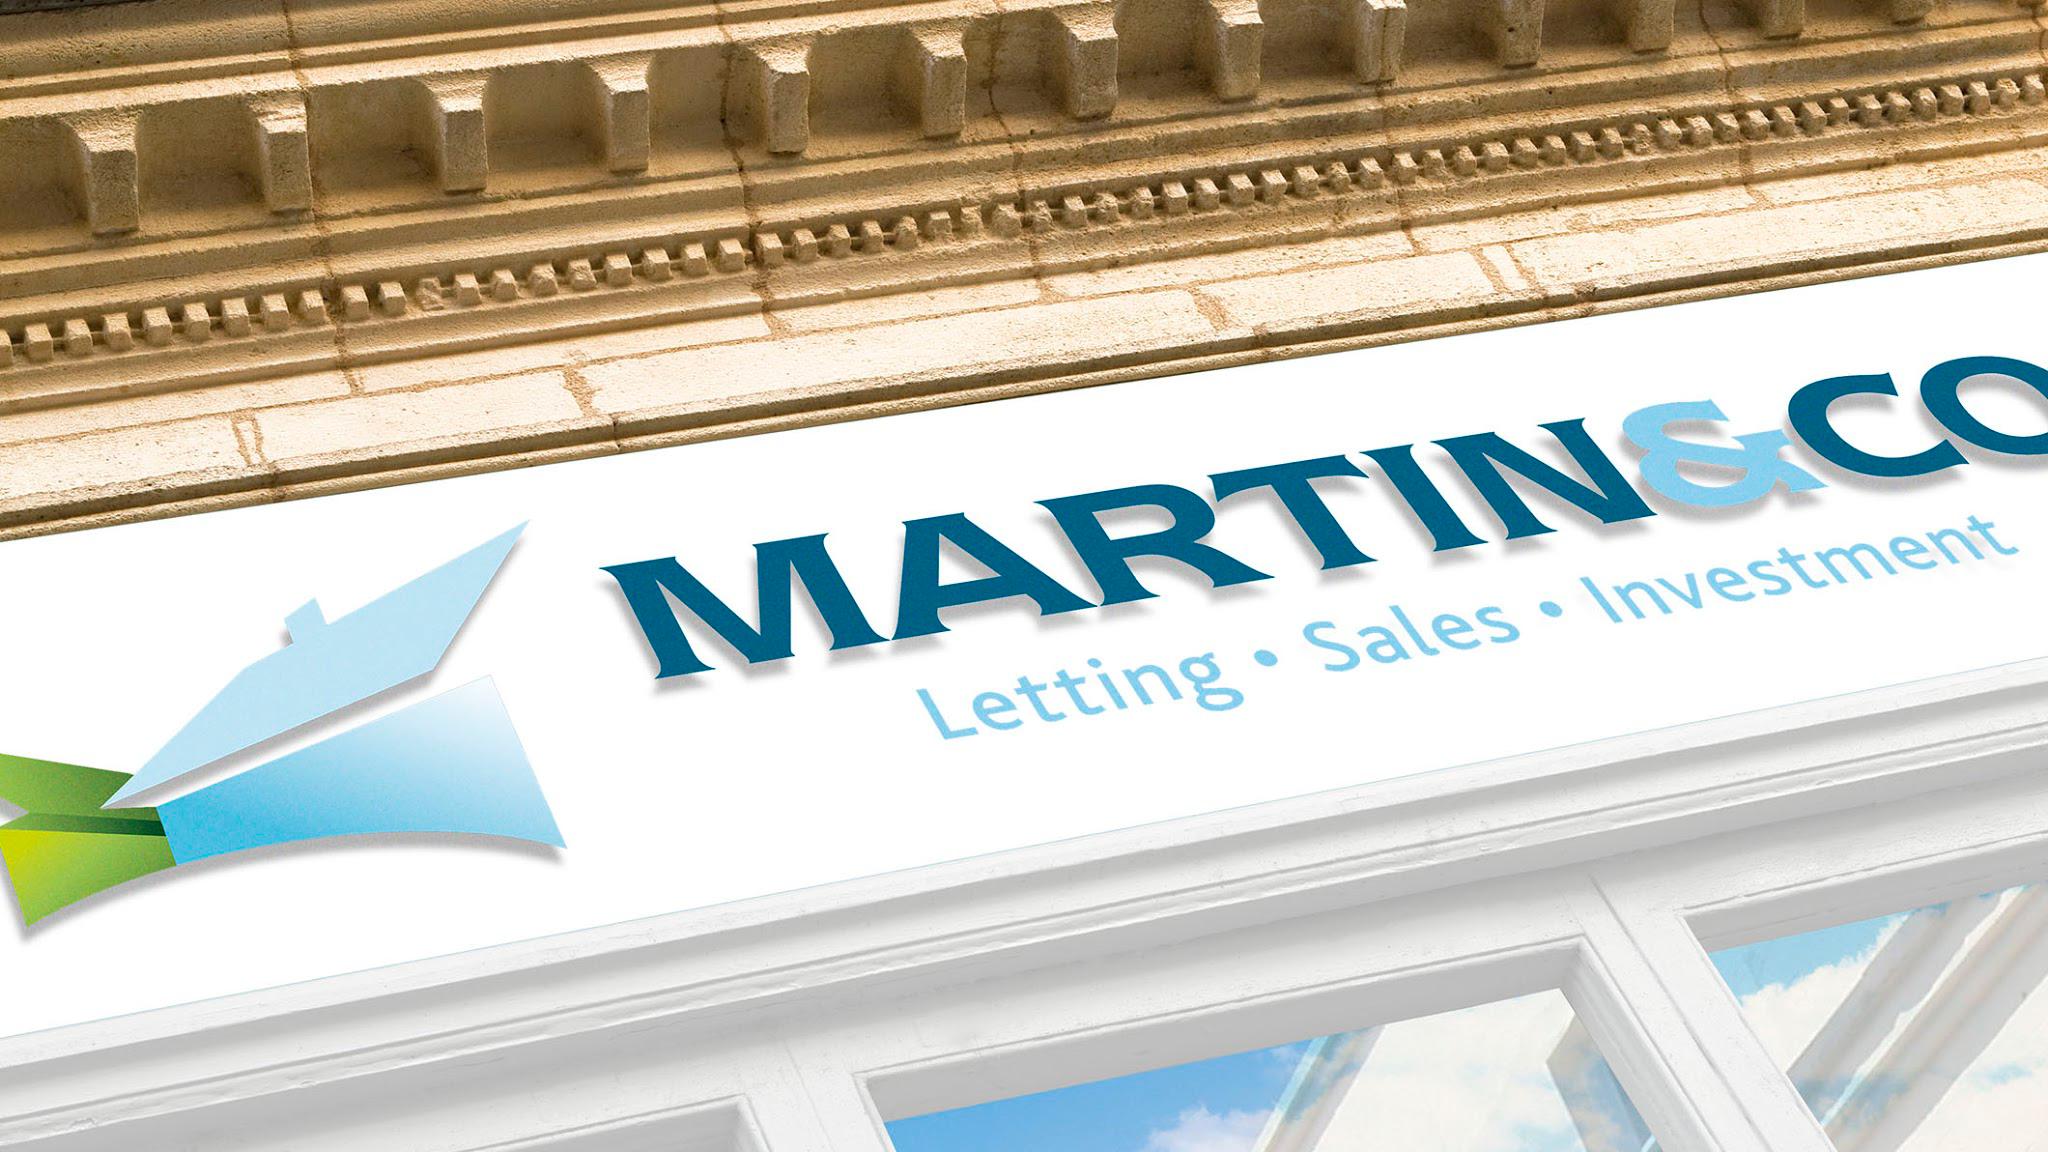 Martin & Co Bedford Lettings & Estate Agents Bedford 01234 300445